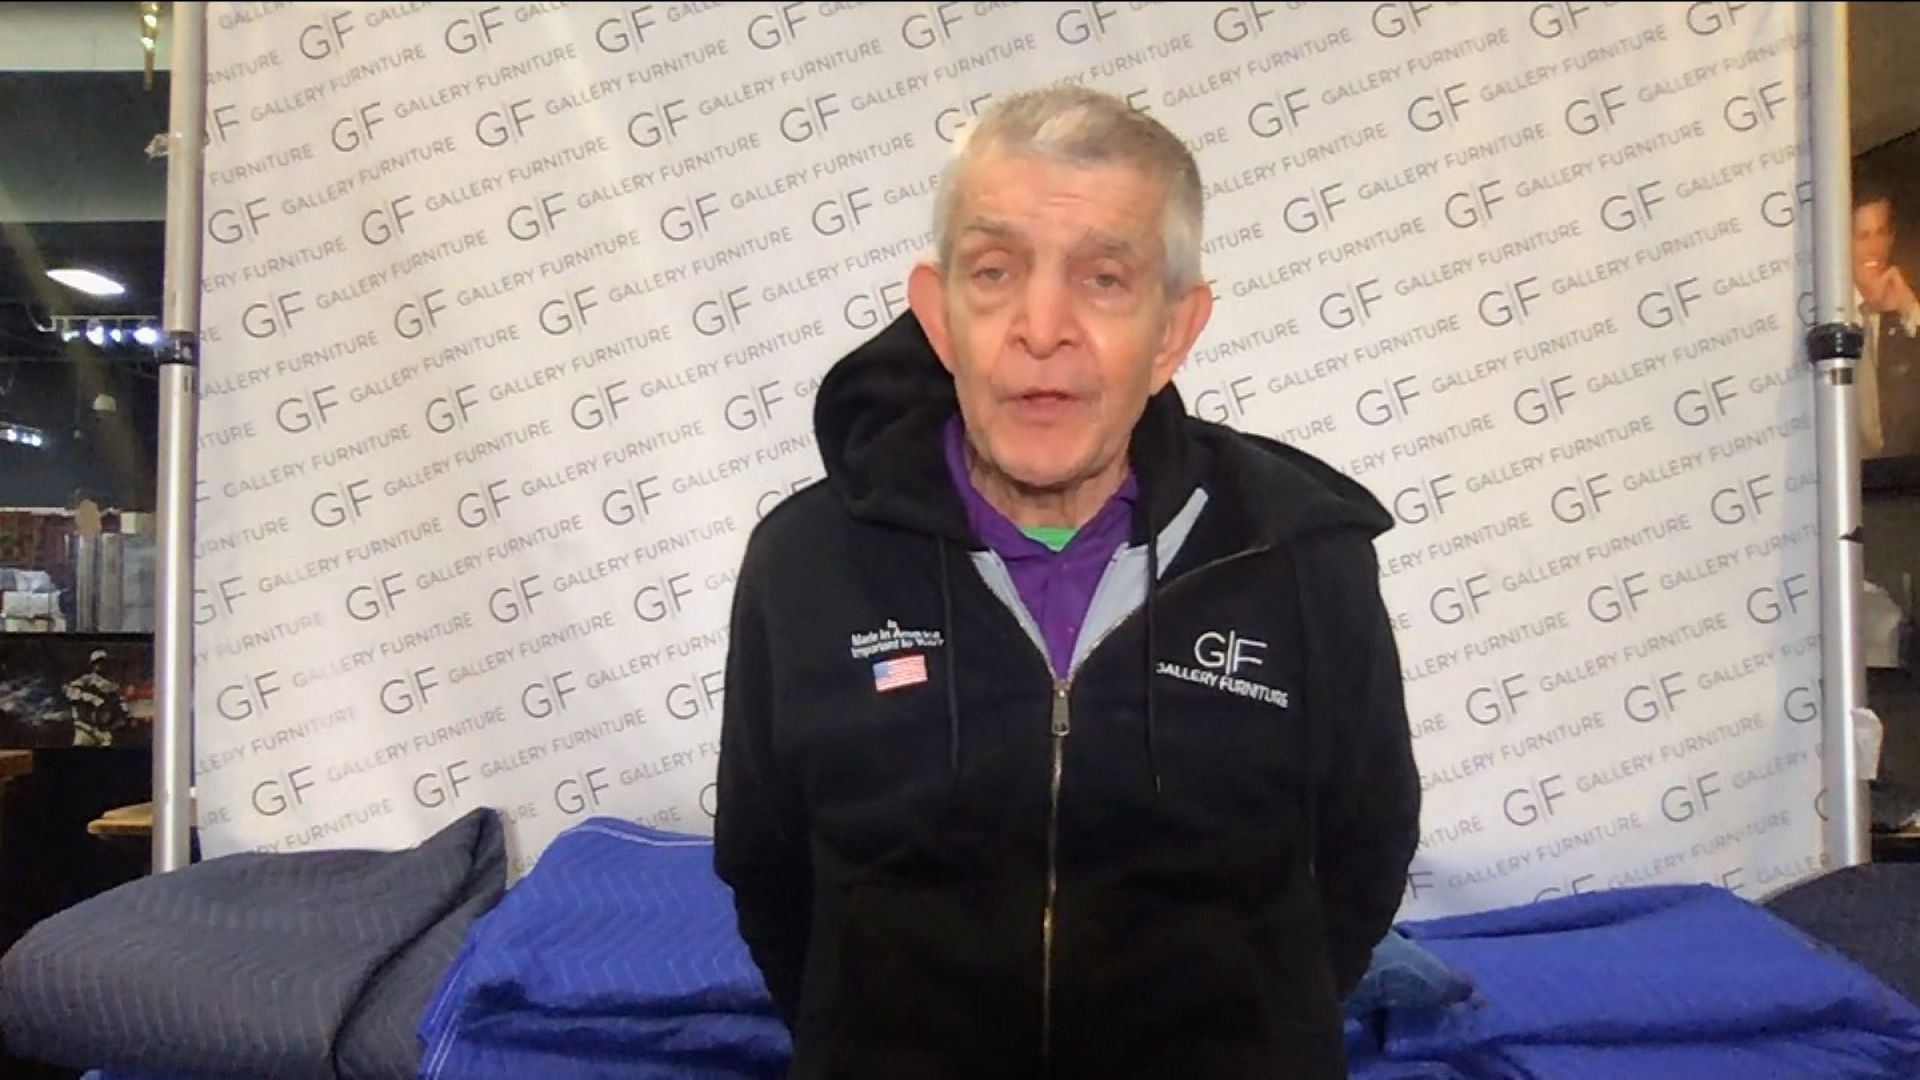 Mattress Mack: A colorful gallery of big bet action